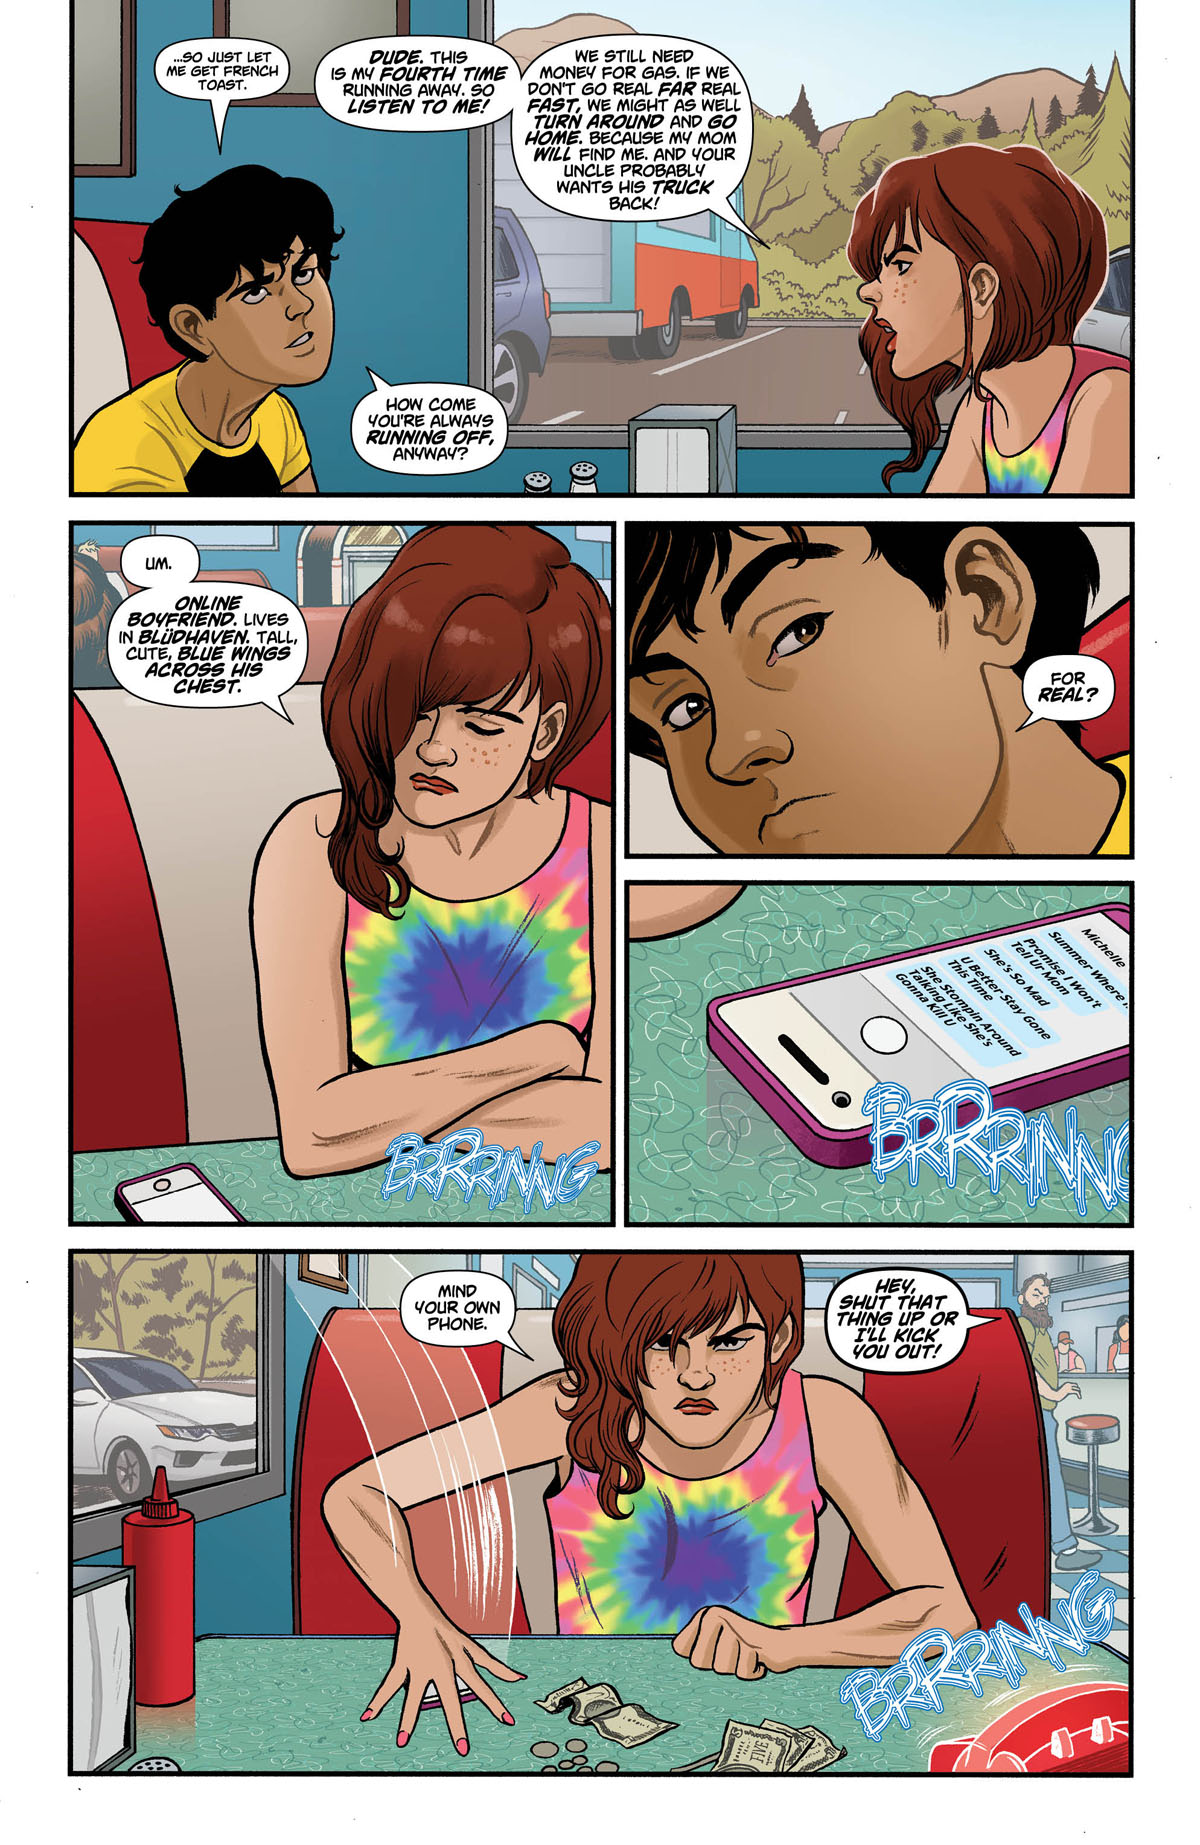 Dial H For Hero #2 page 3